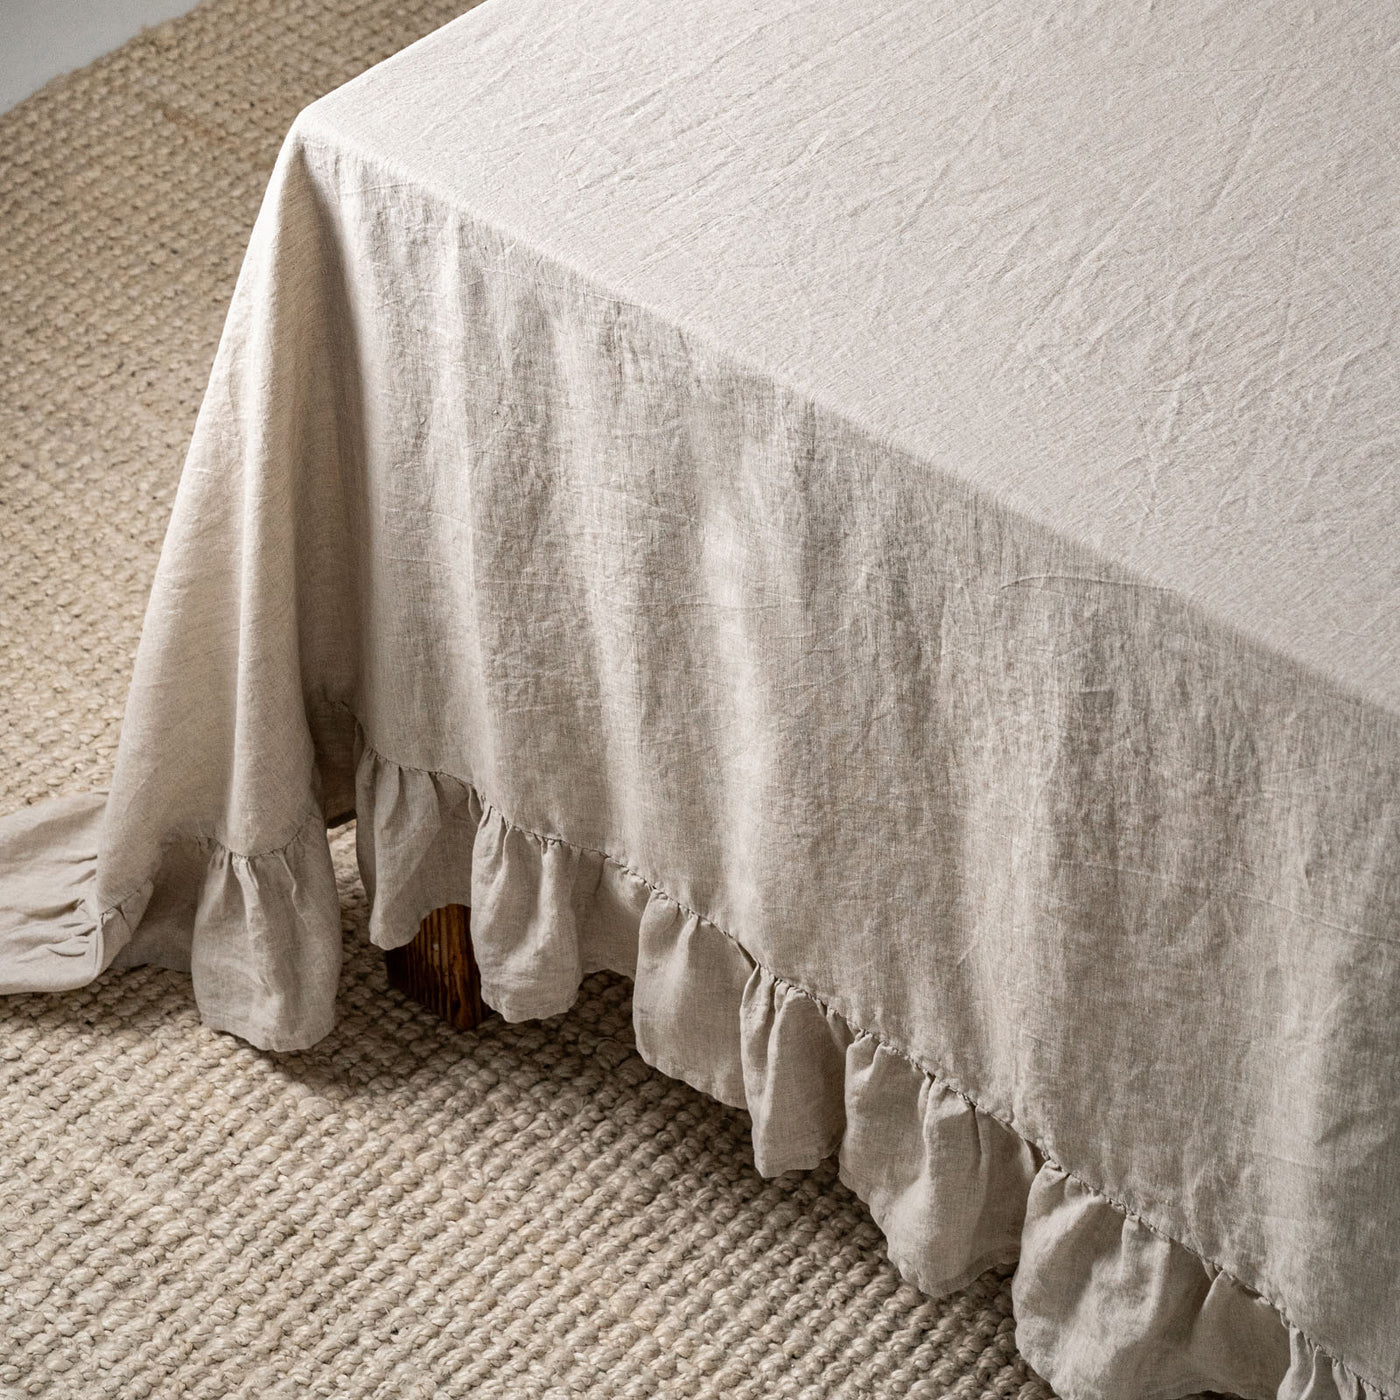 French Flax Linen Ruffles Table Cloth in Natural